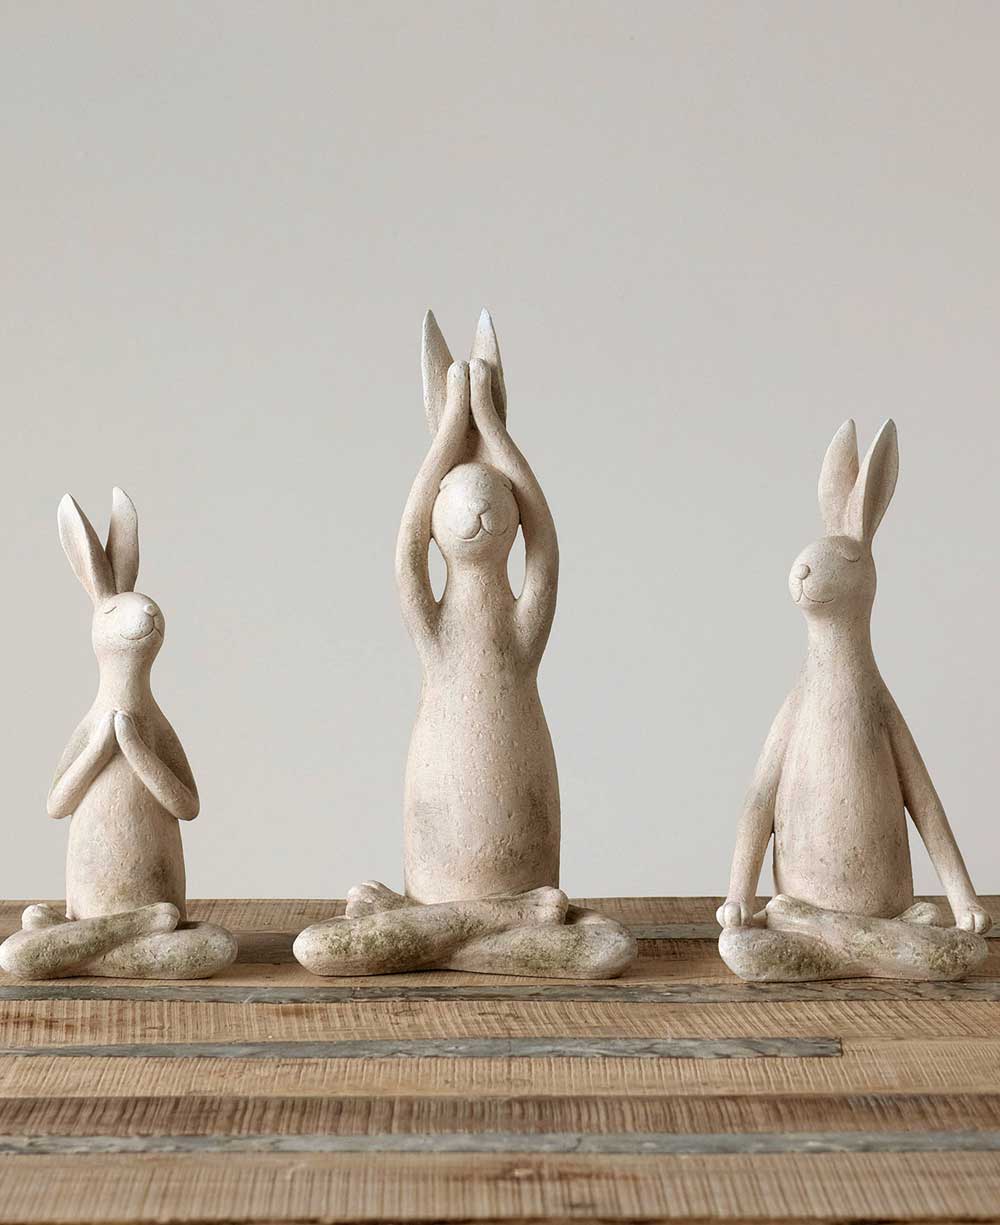 Karma Bunnies Yoga Rabbit Statues, Sold Individually Or Set - Sculptures & Statues Set of 3